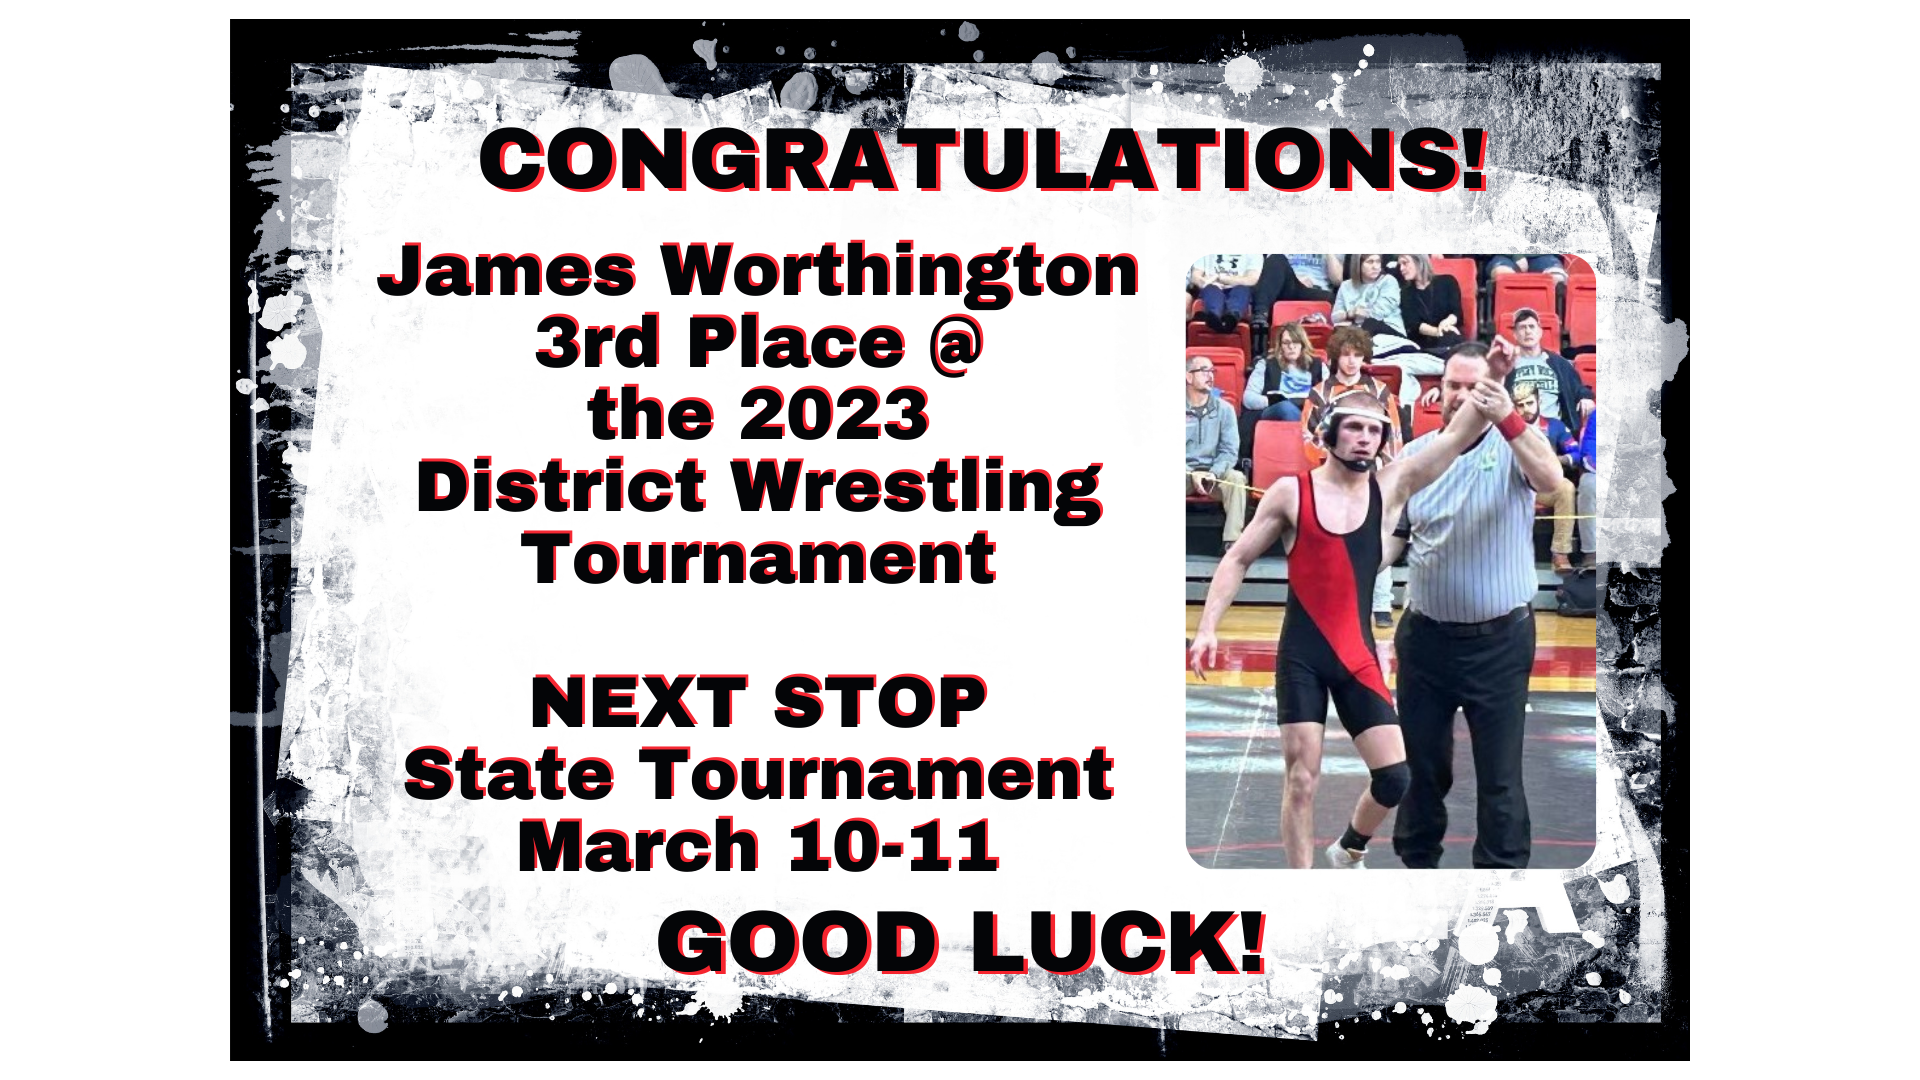 James Worthington is headed to the State Tournament